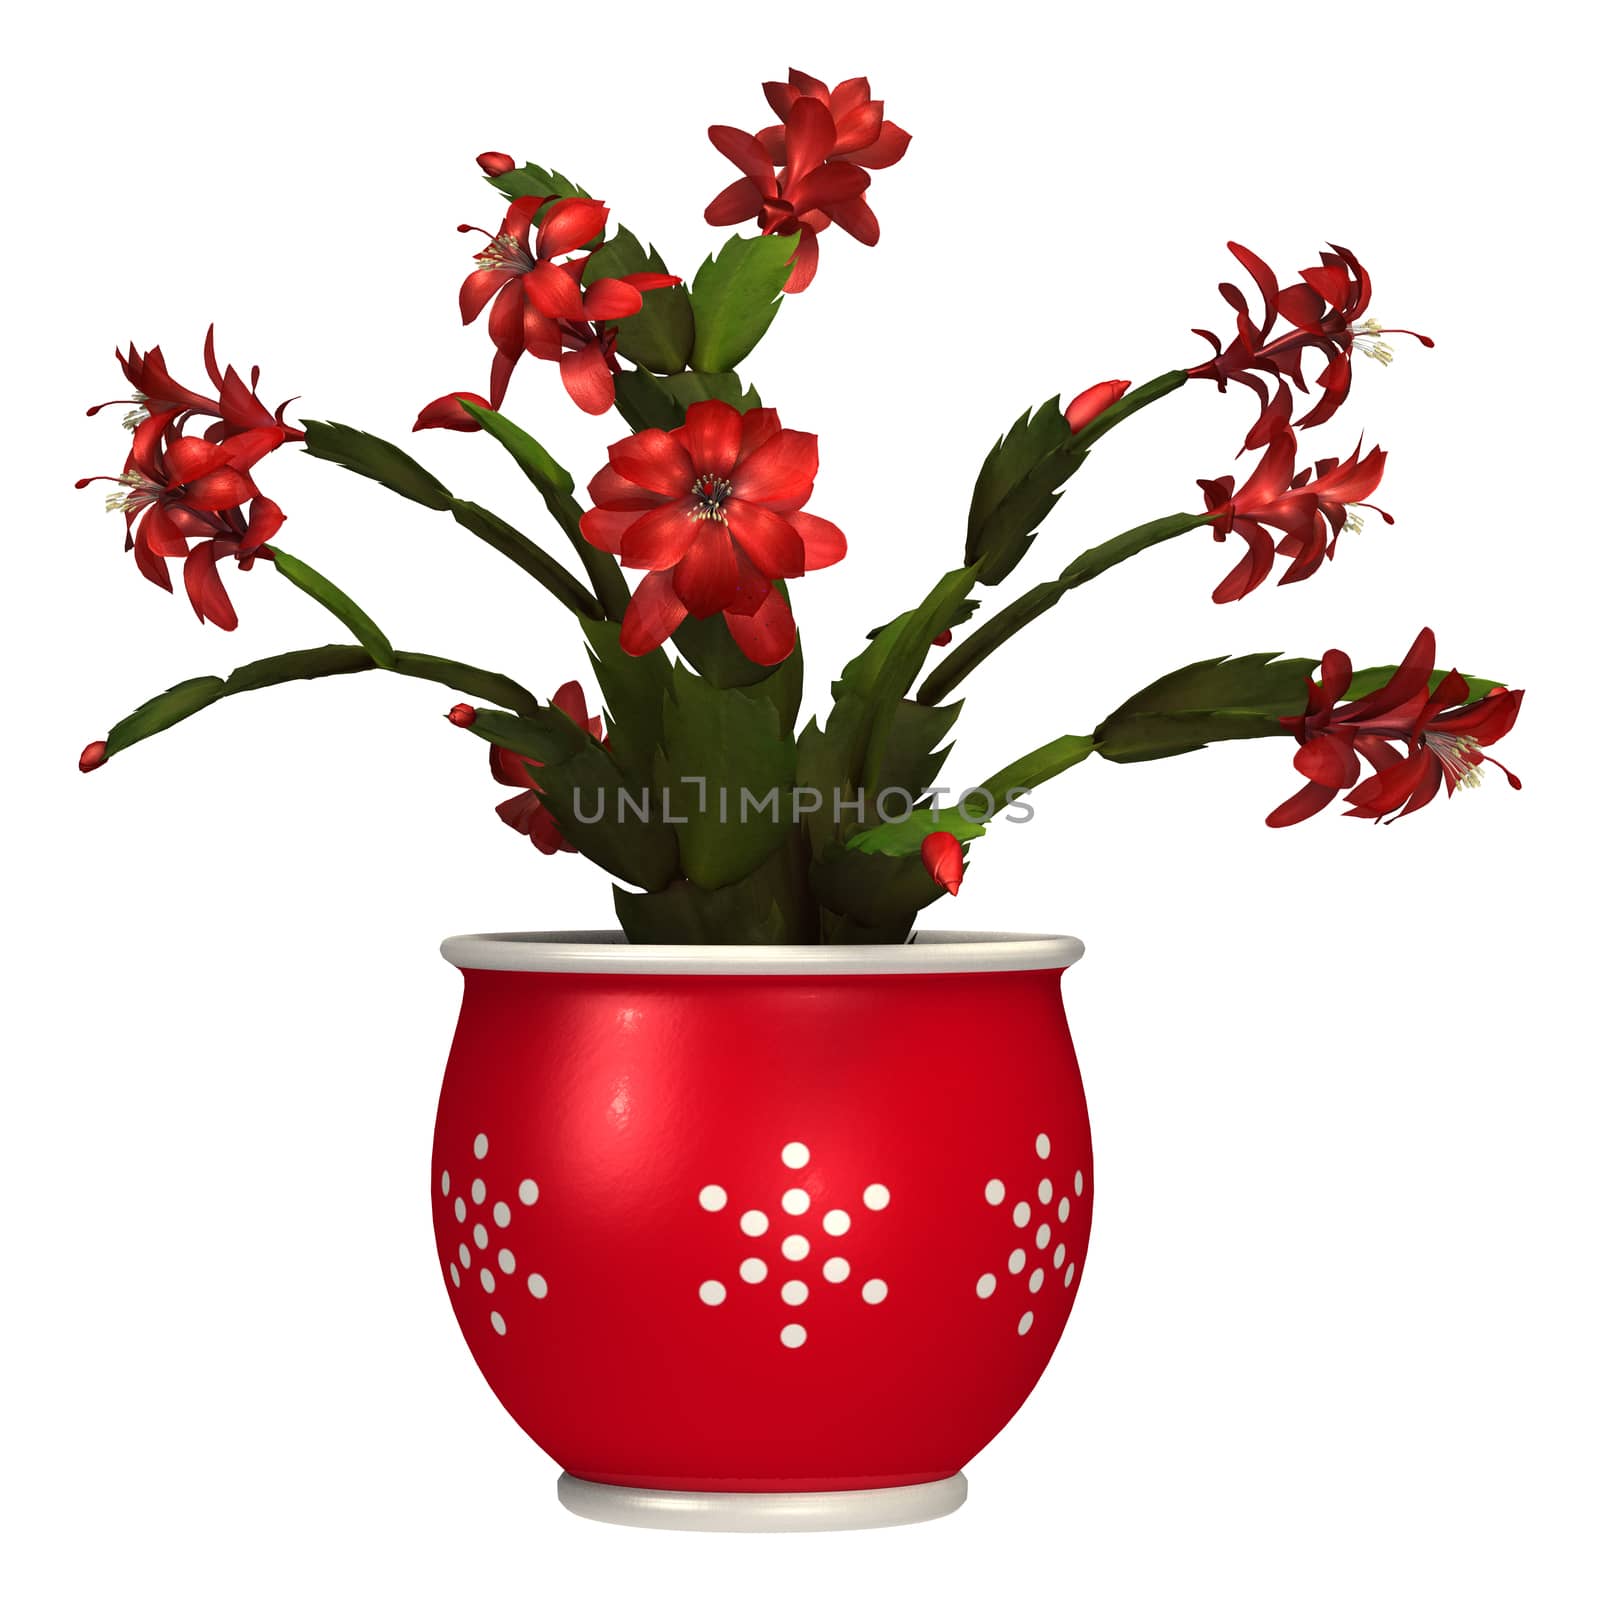 3D digital render of a Christmas cactus in a flower pot isolated on white background